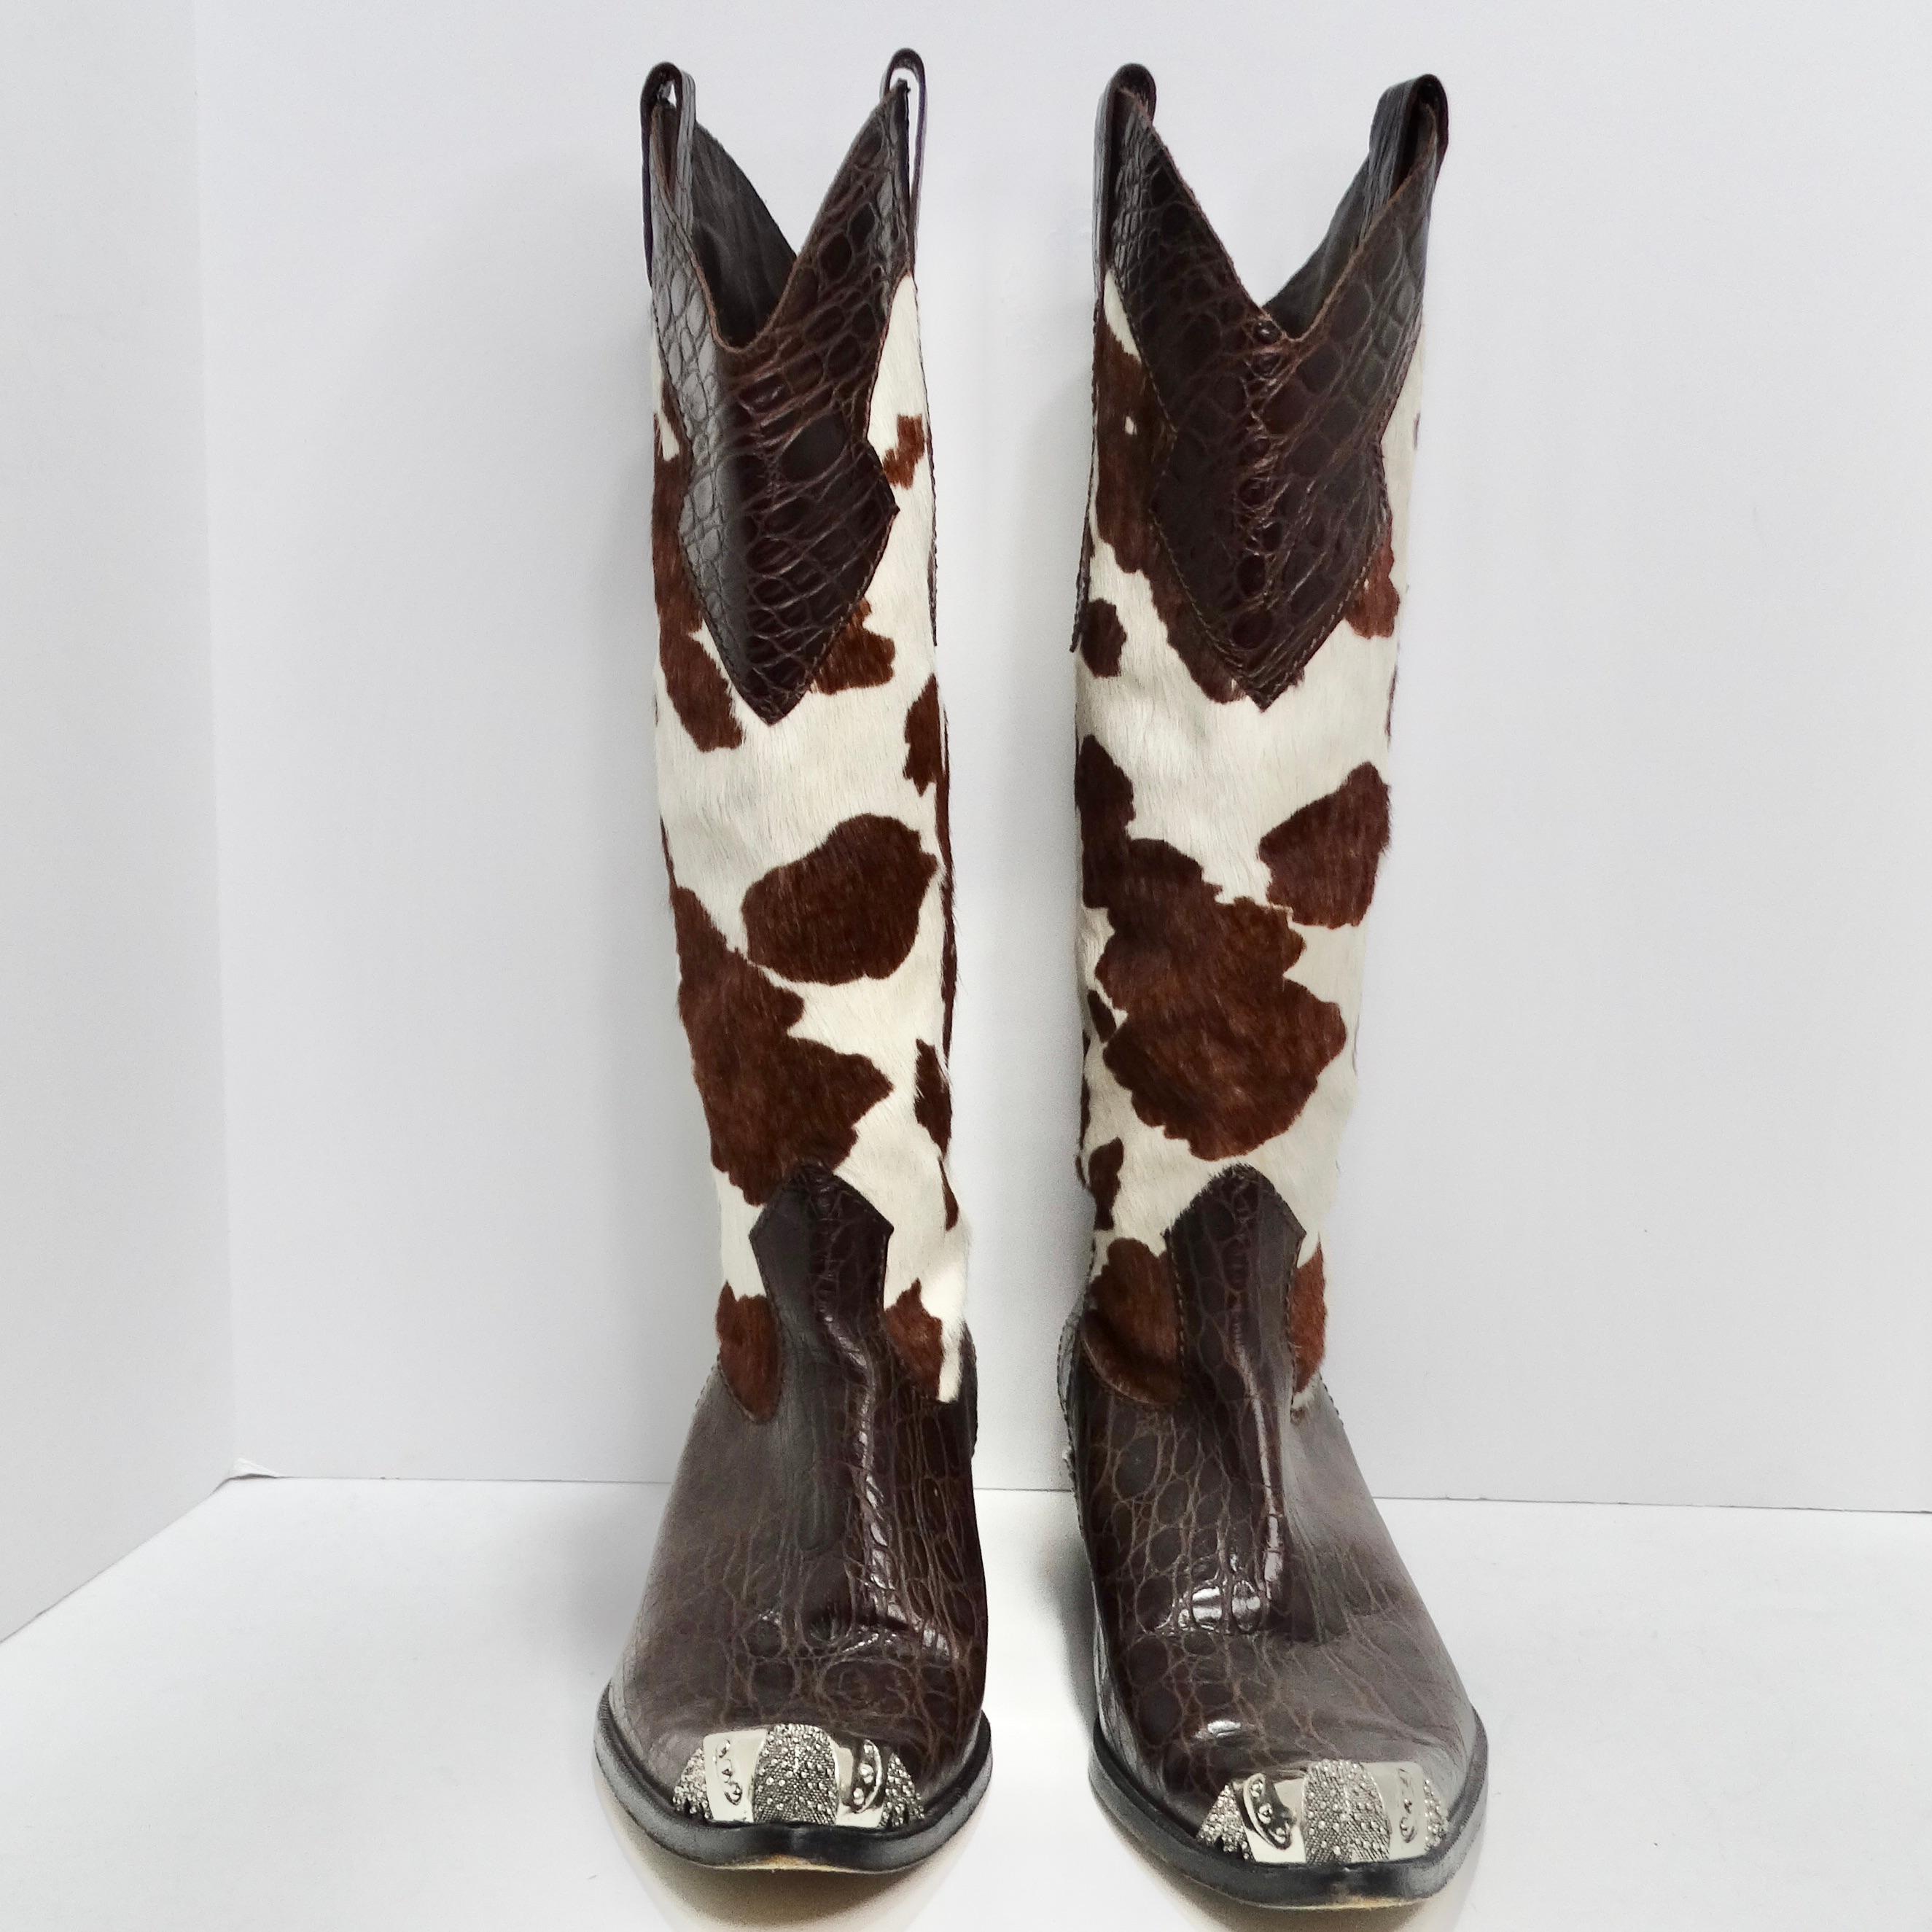 Introducing the Vintage Cowhide Sterling Silver Cowboy Boots—a remarkable pair of statement boots that seamlessly blend Western flair with luxurious details. The boots feature a striking combination of beautiful cowhide fur and rich brown leather.